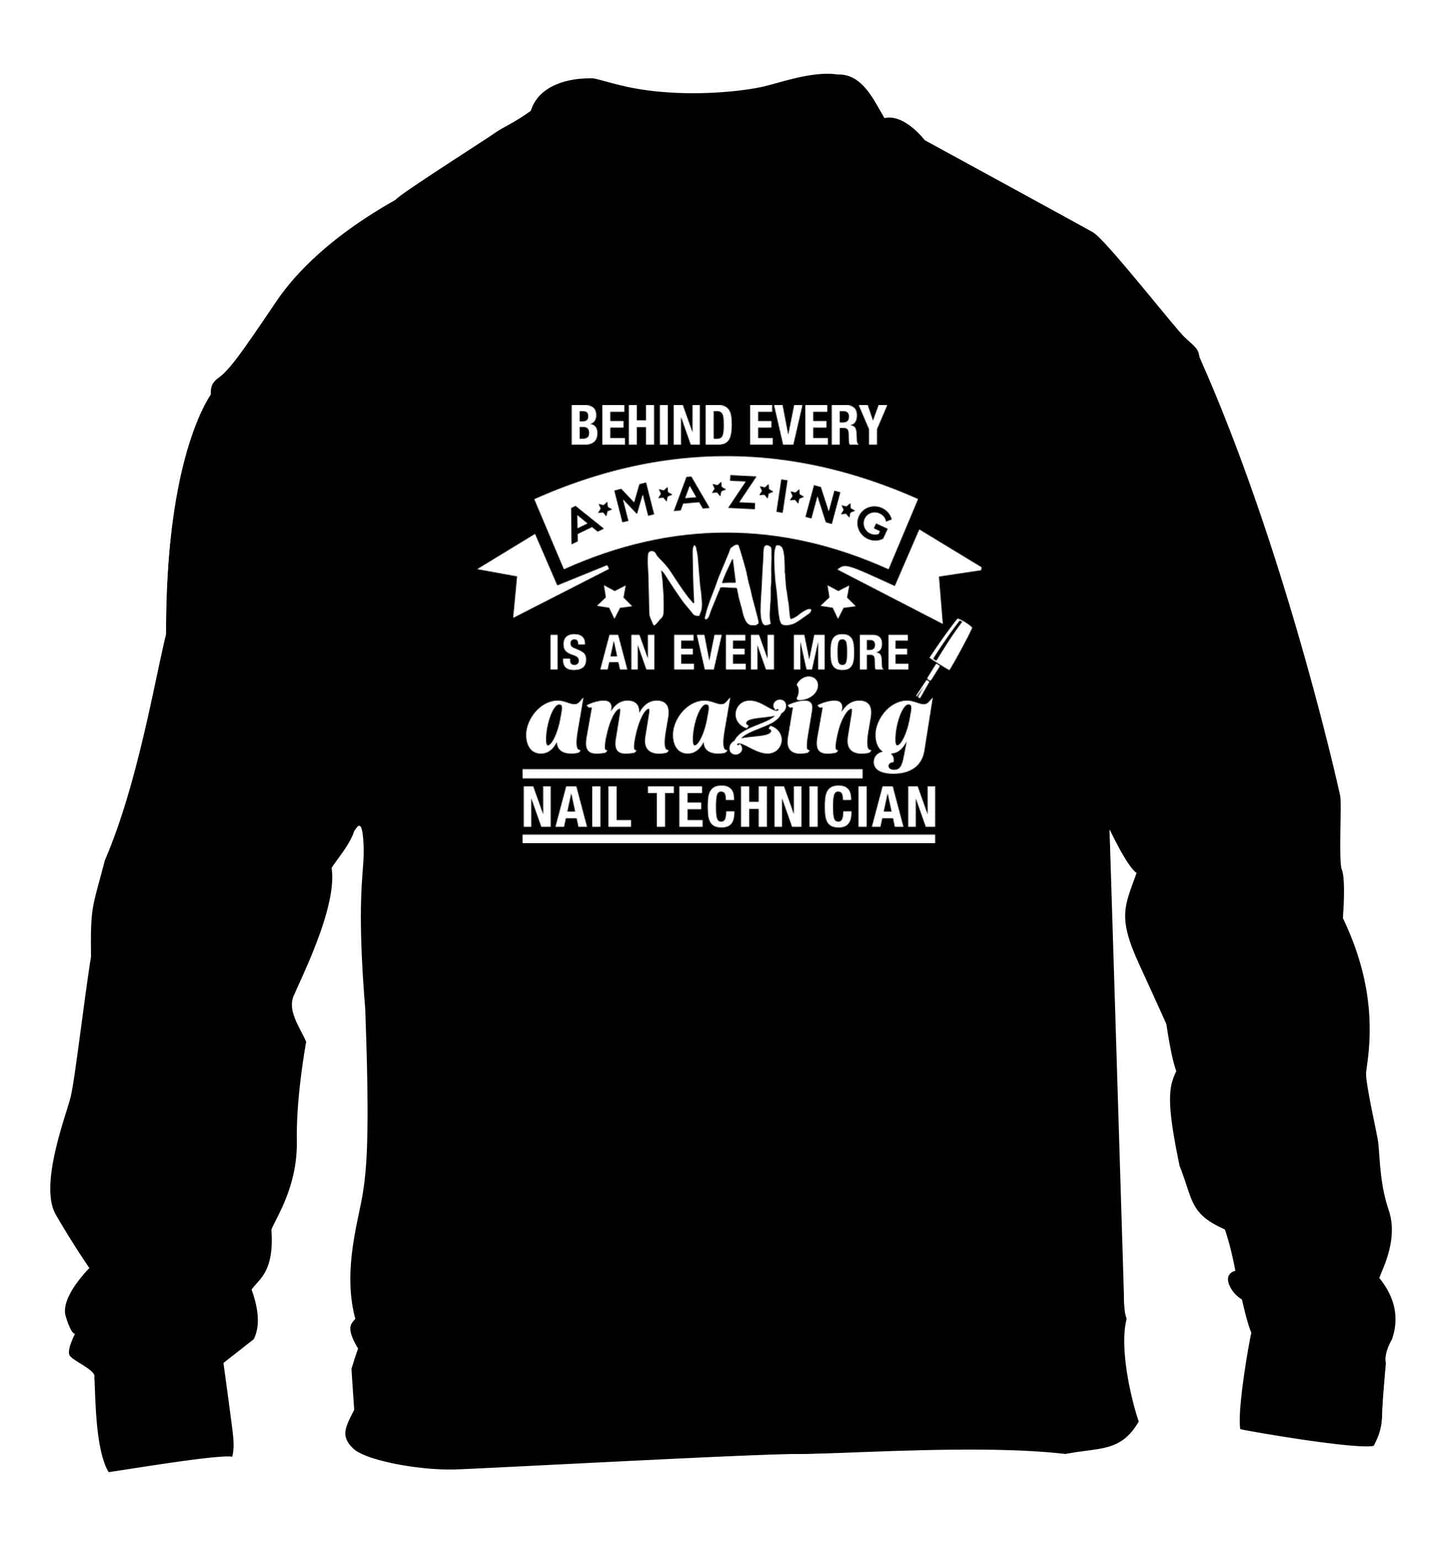 Behind every amazing nail is an even more amazing nail technician children's black sweater 12-13 Years